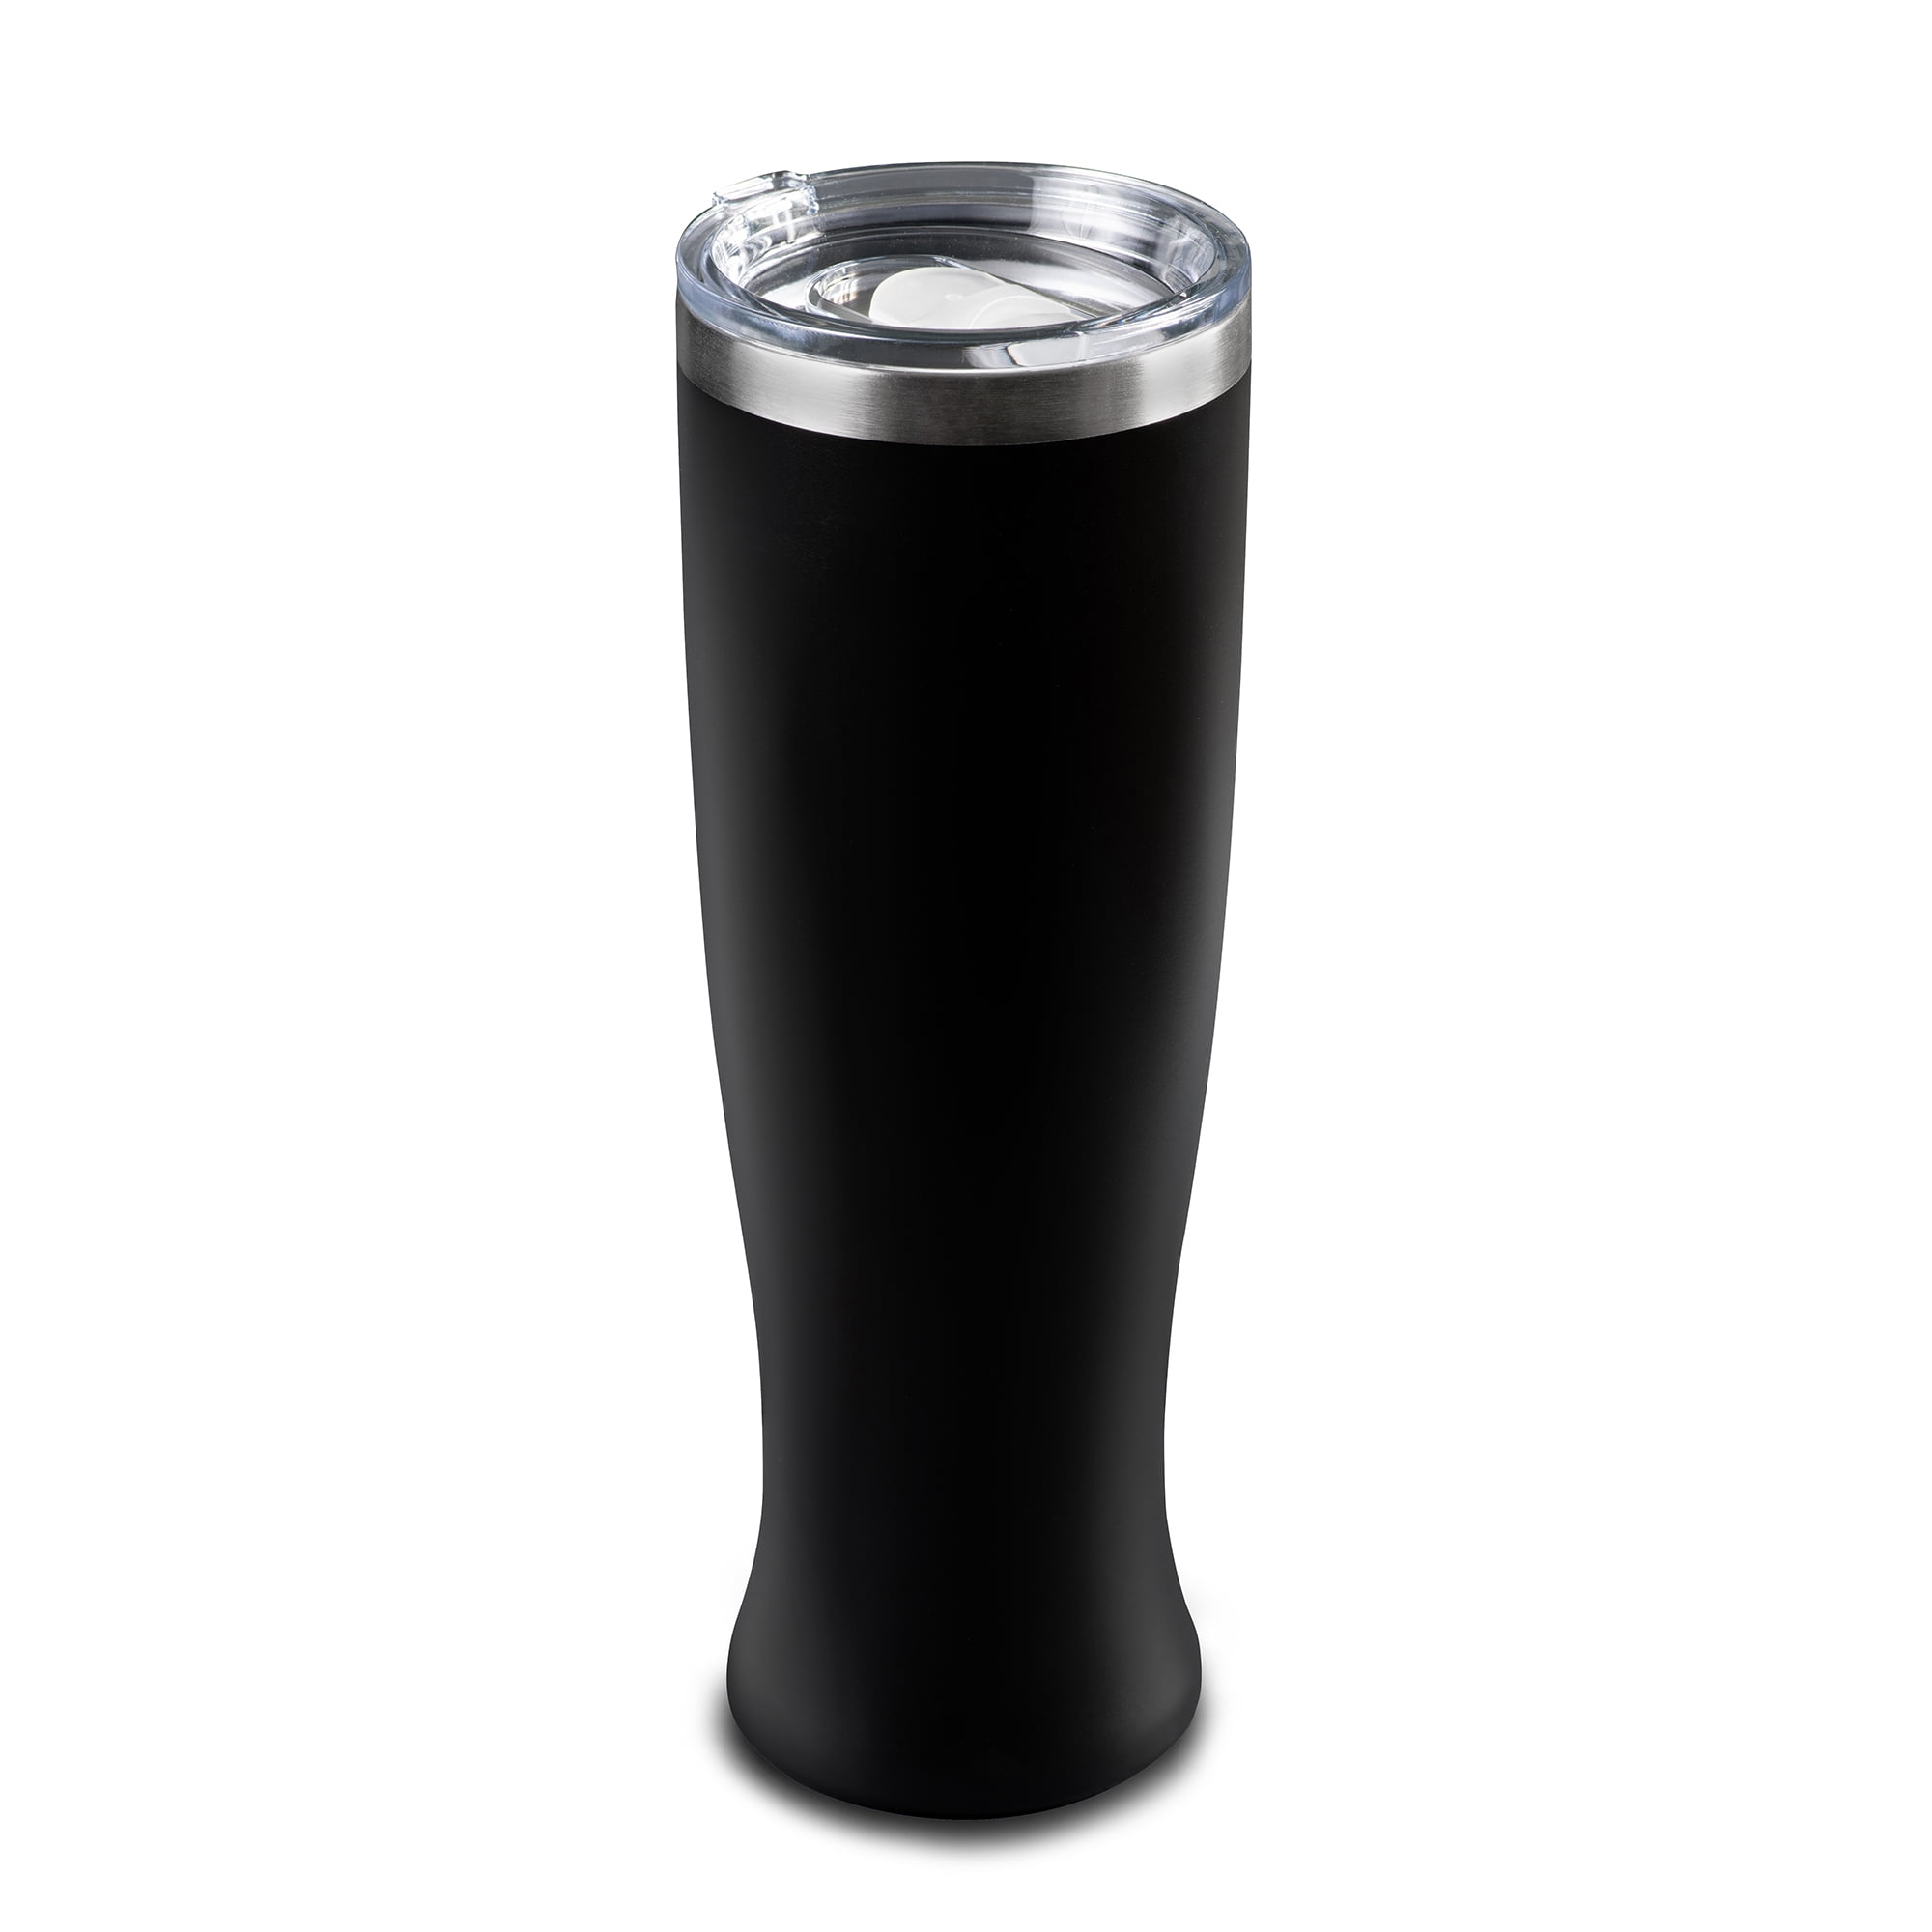 Single Tumbler Perfect for COLD or HOT beverages Sweat Free Double Wall Vacuum Insulated Beer Tumbler Mason Forge Stainless Steel Double Wall Vacuum Insulated 14 Ounce Pilsner Style Beer Tumbler 